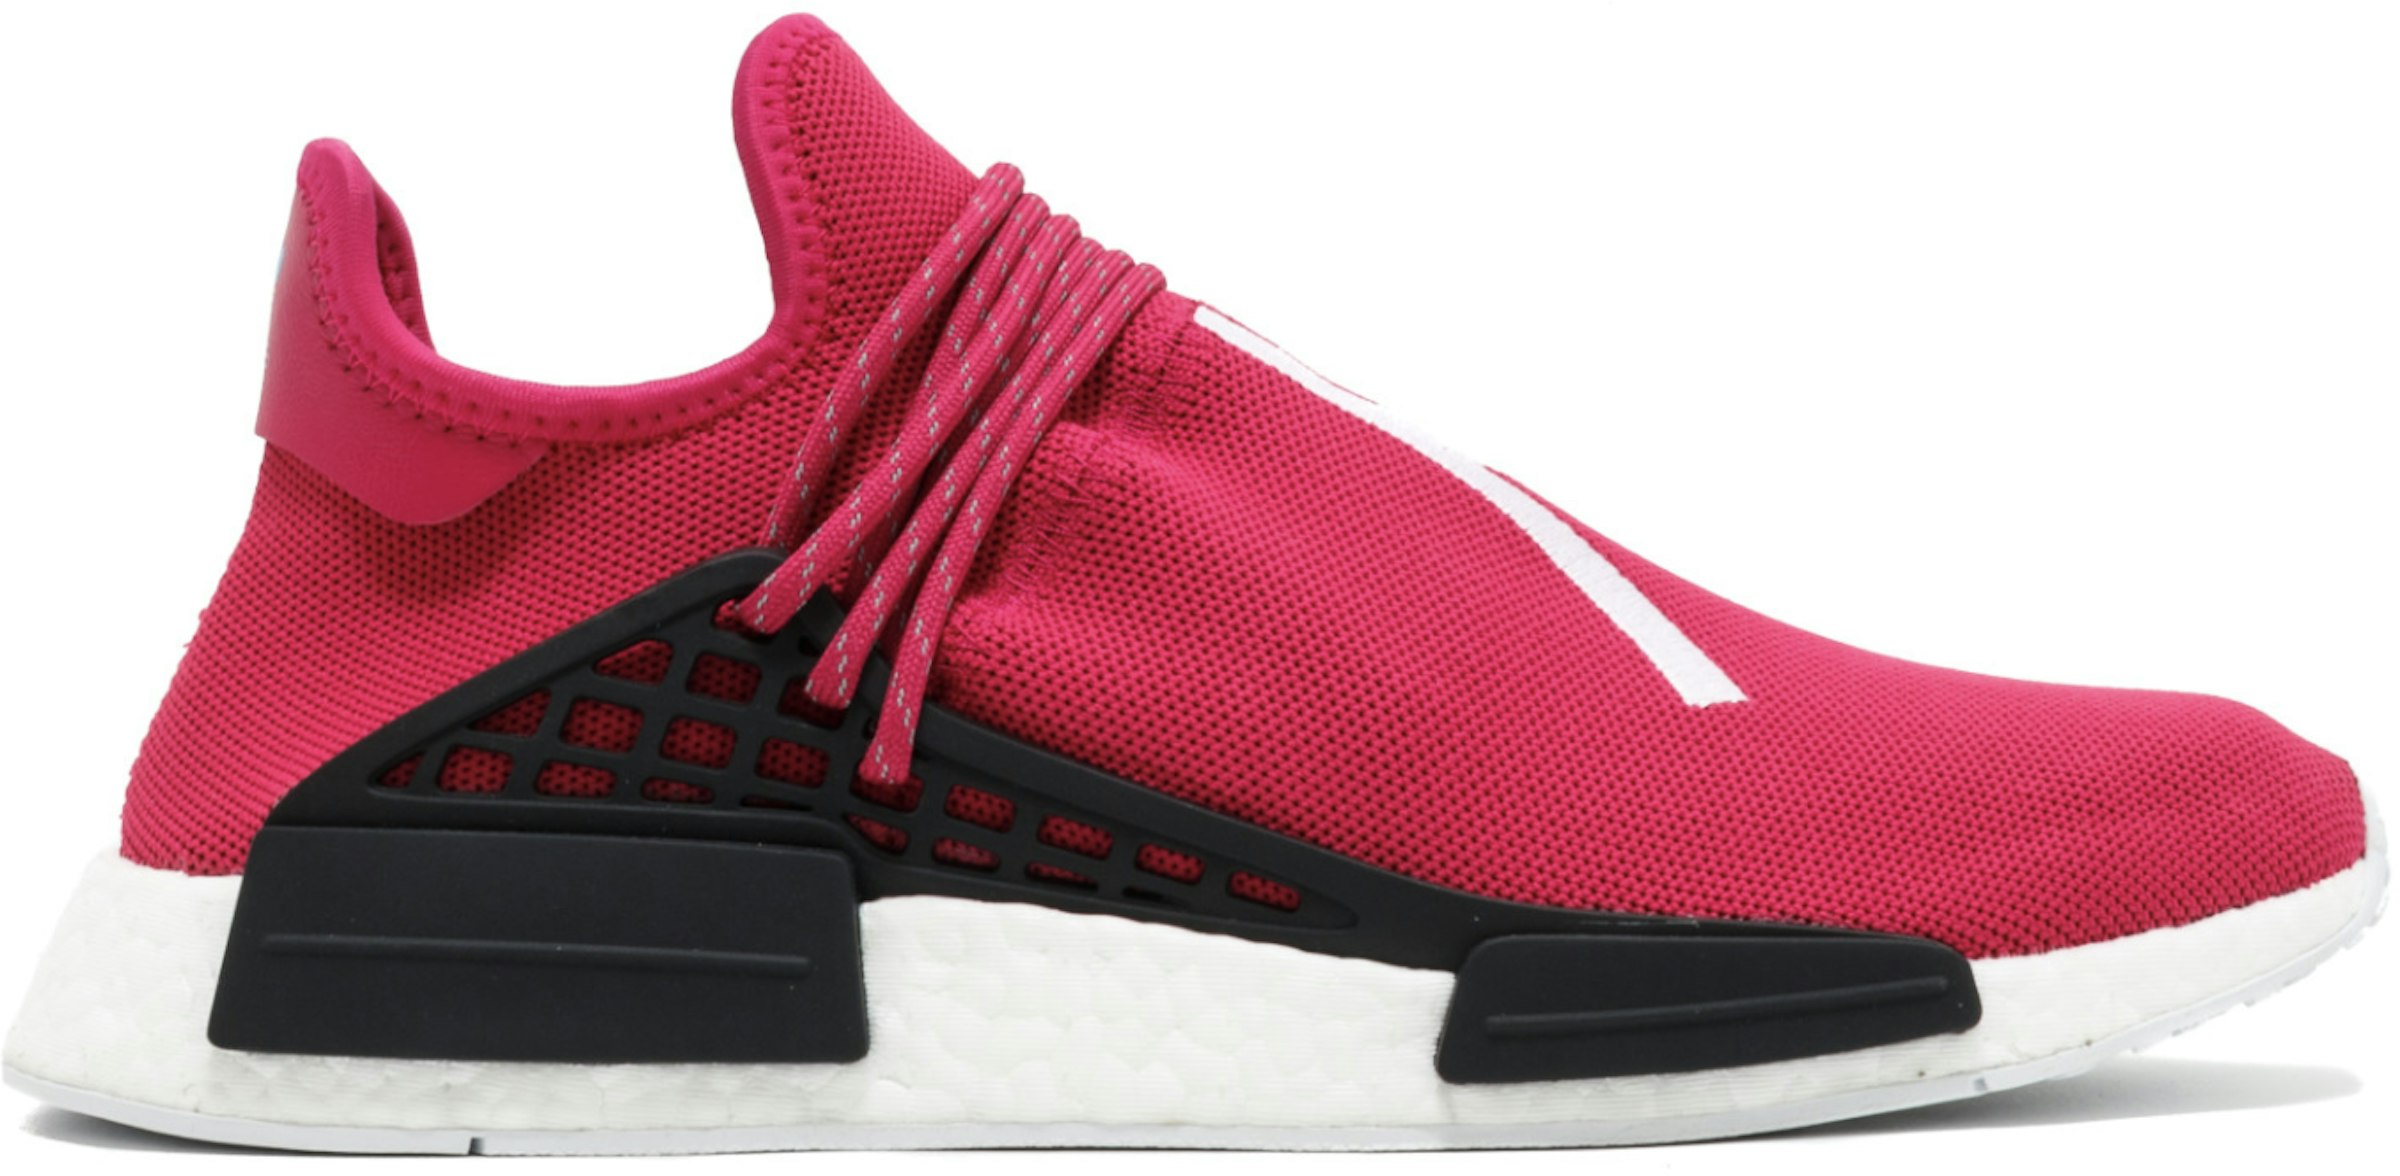 adidas NMD HU Pharrell Friends and Family Pink Men's BB0621 - US